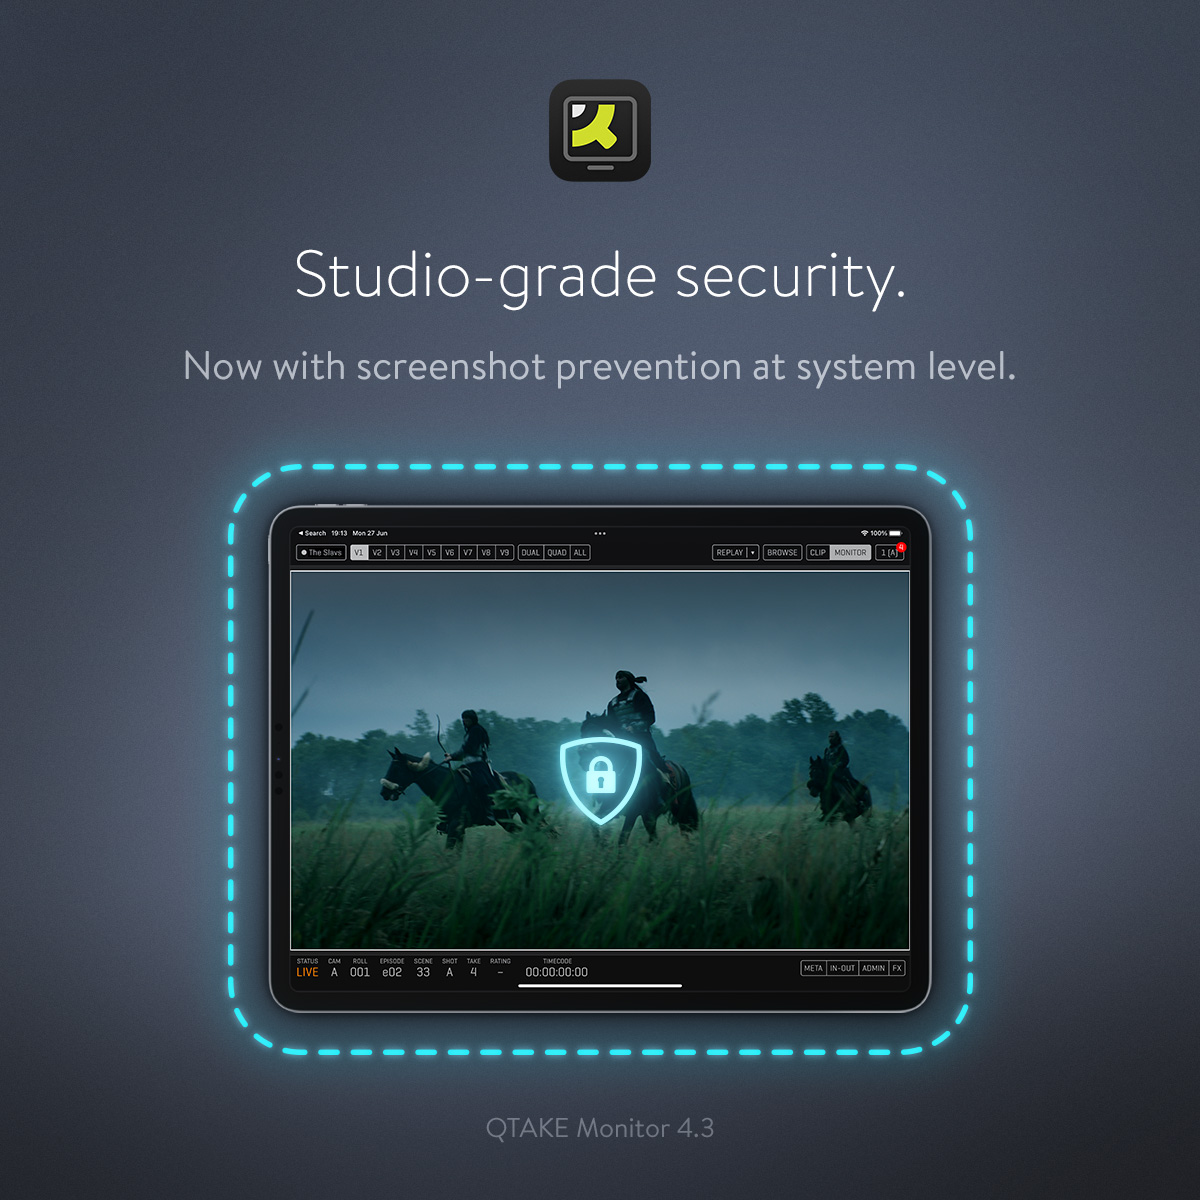 QTAKE Monitor 4. with screenshot and screen recording prevention